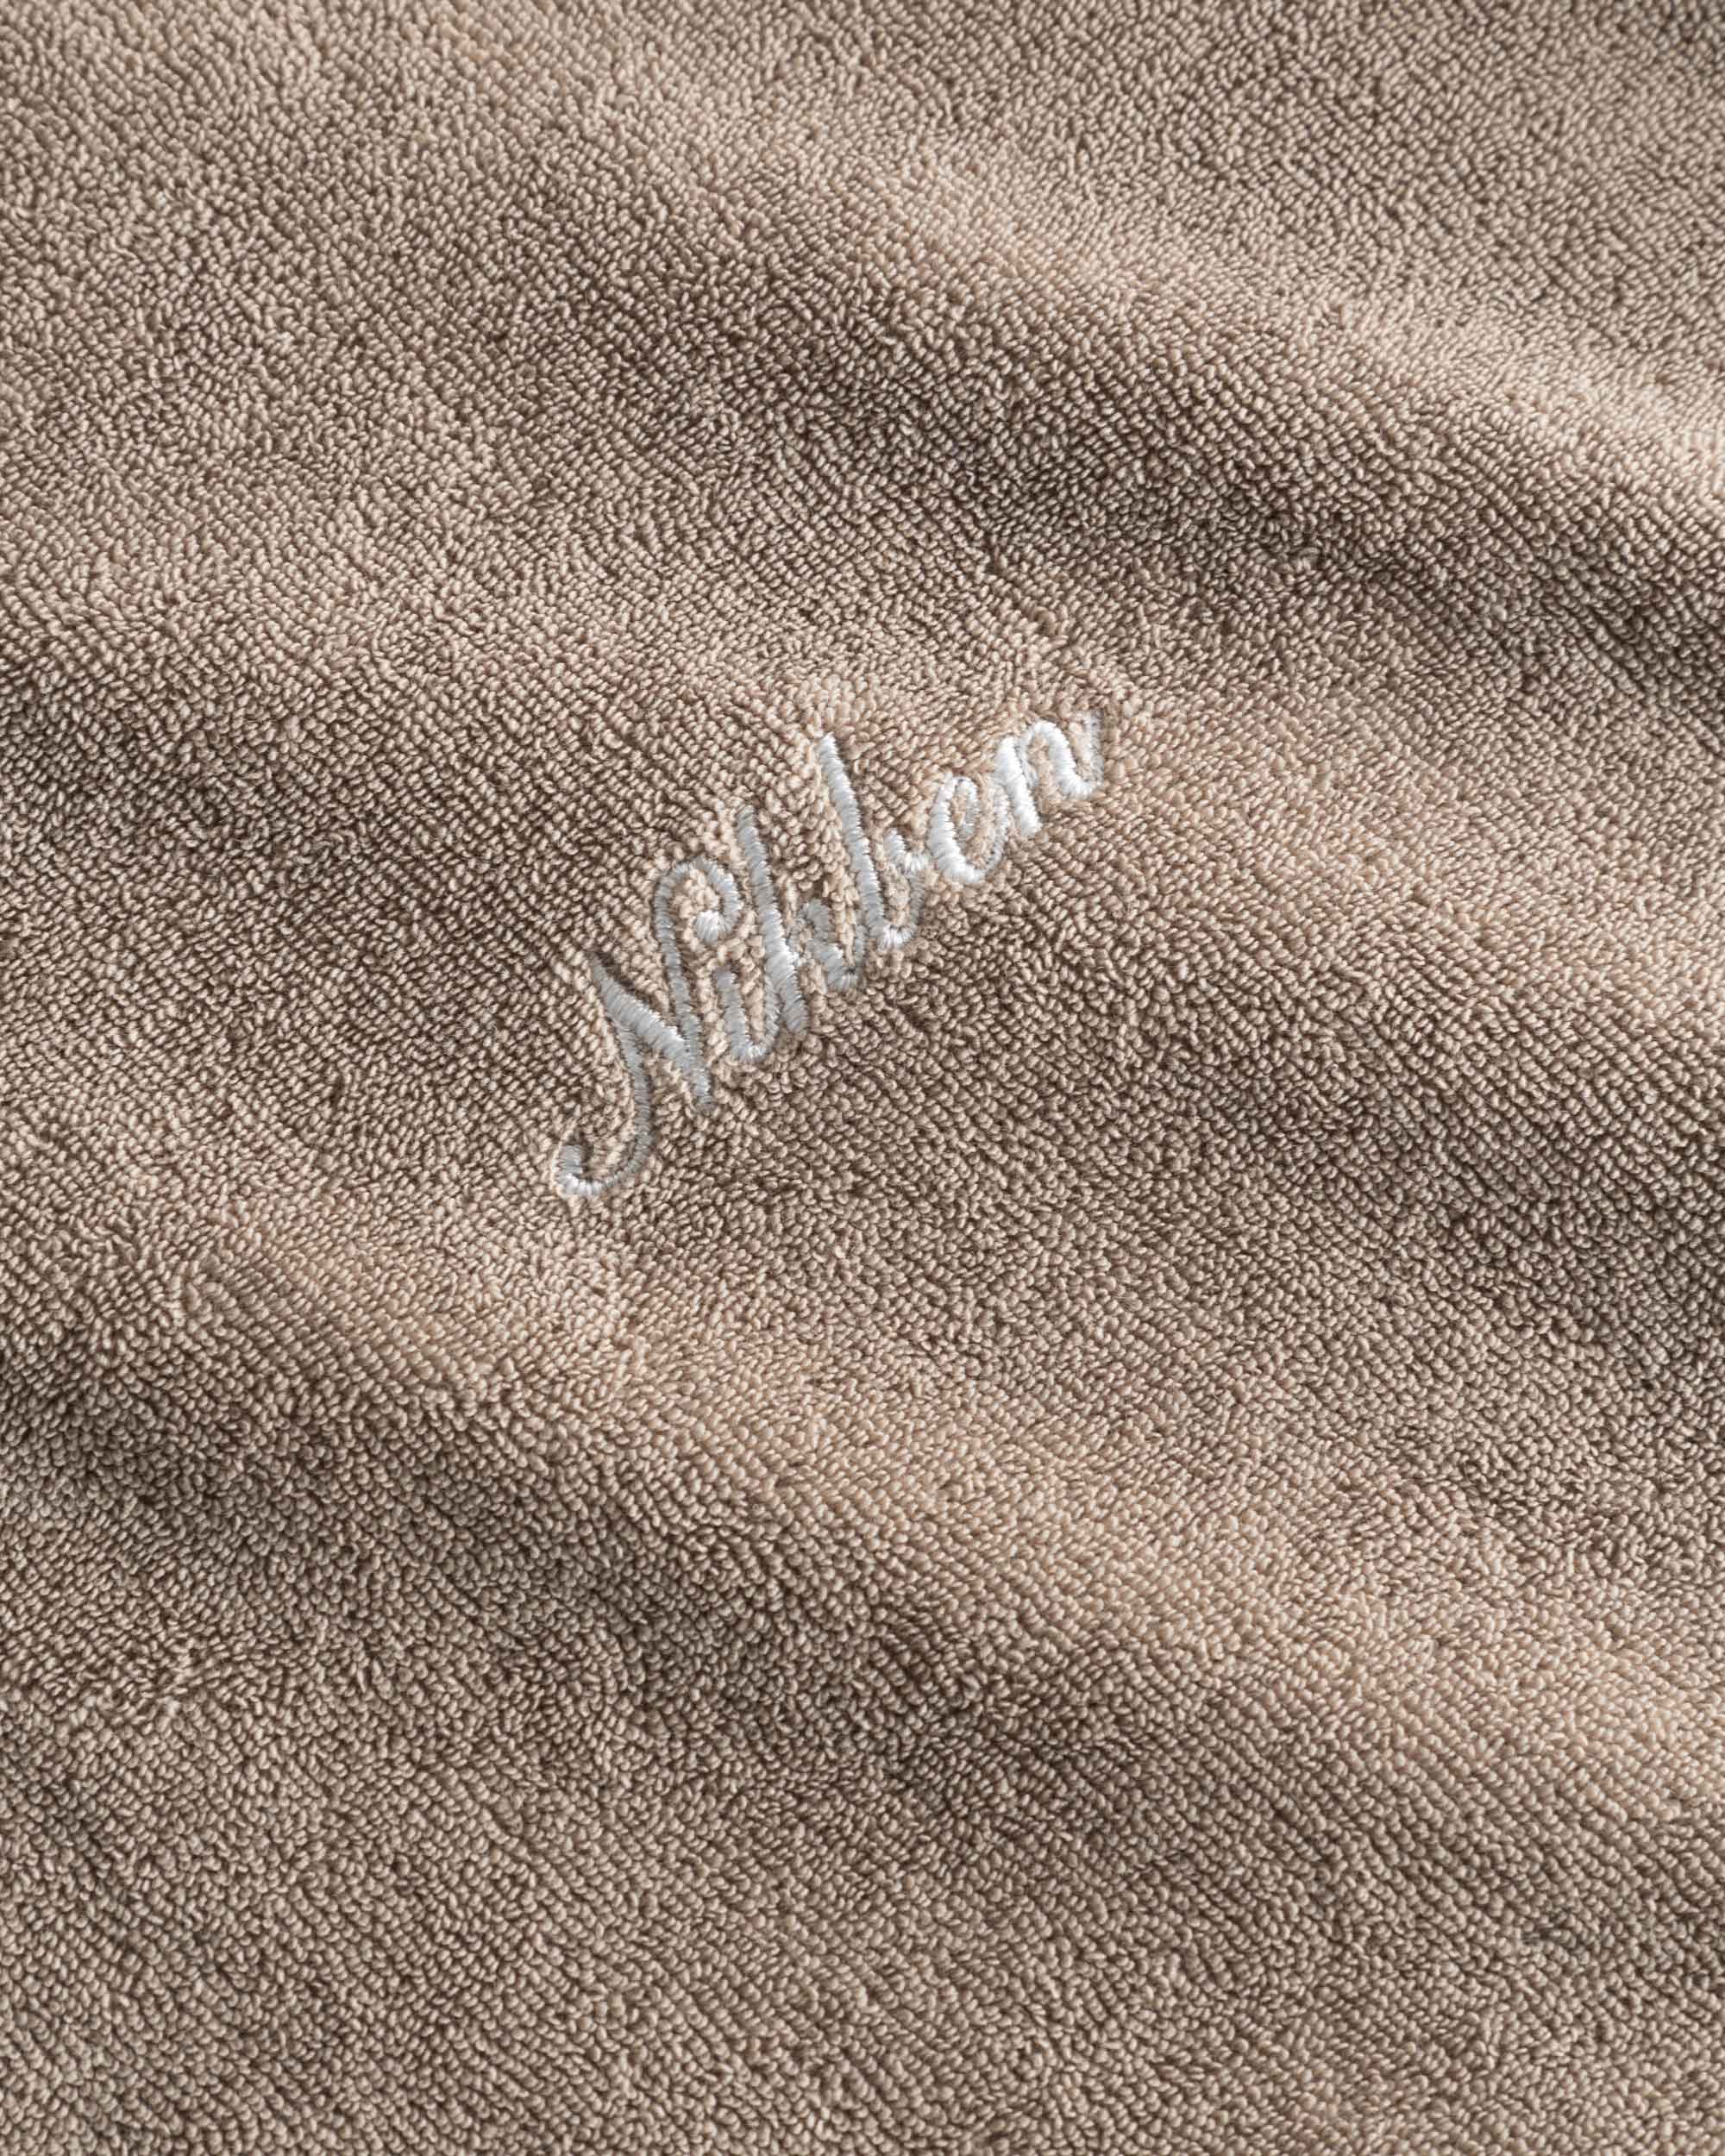 Close up of a white embroidered "Nikben" logo on a beige Terry hoodie.